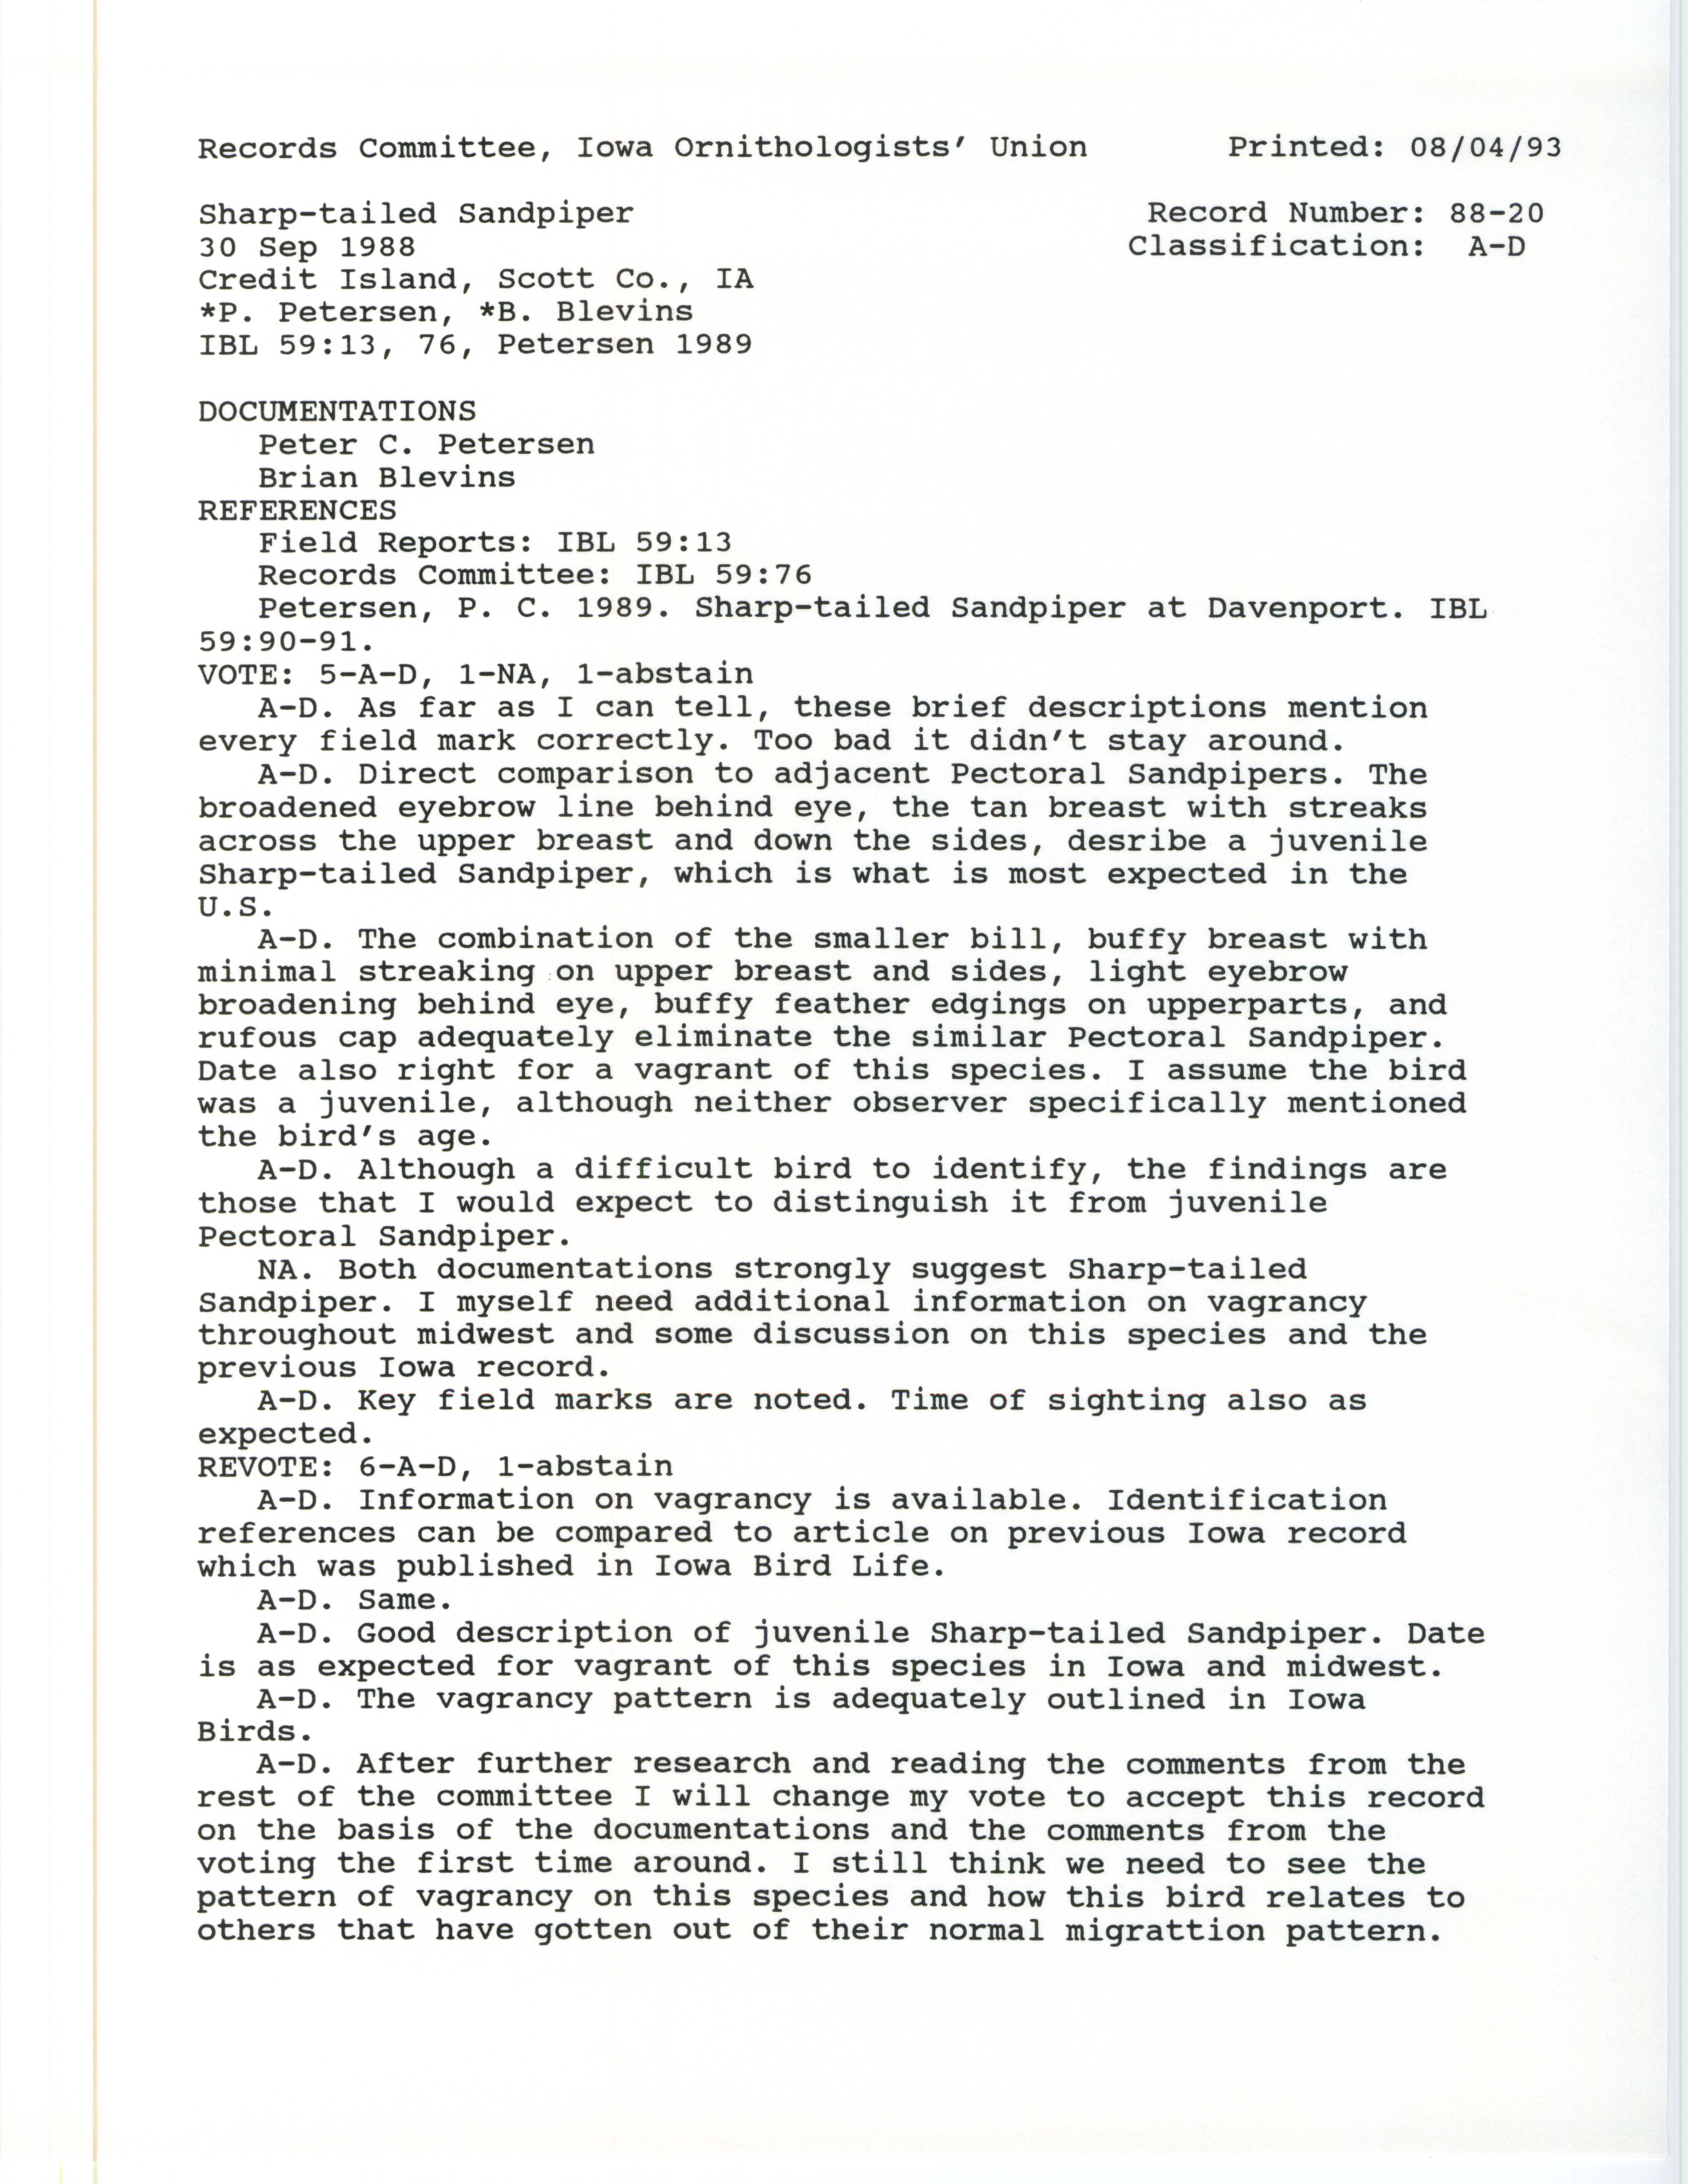 Records Committee review for rare bird sighting of Sharp-tailed Sandpiper at Credit Island, 1988